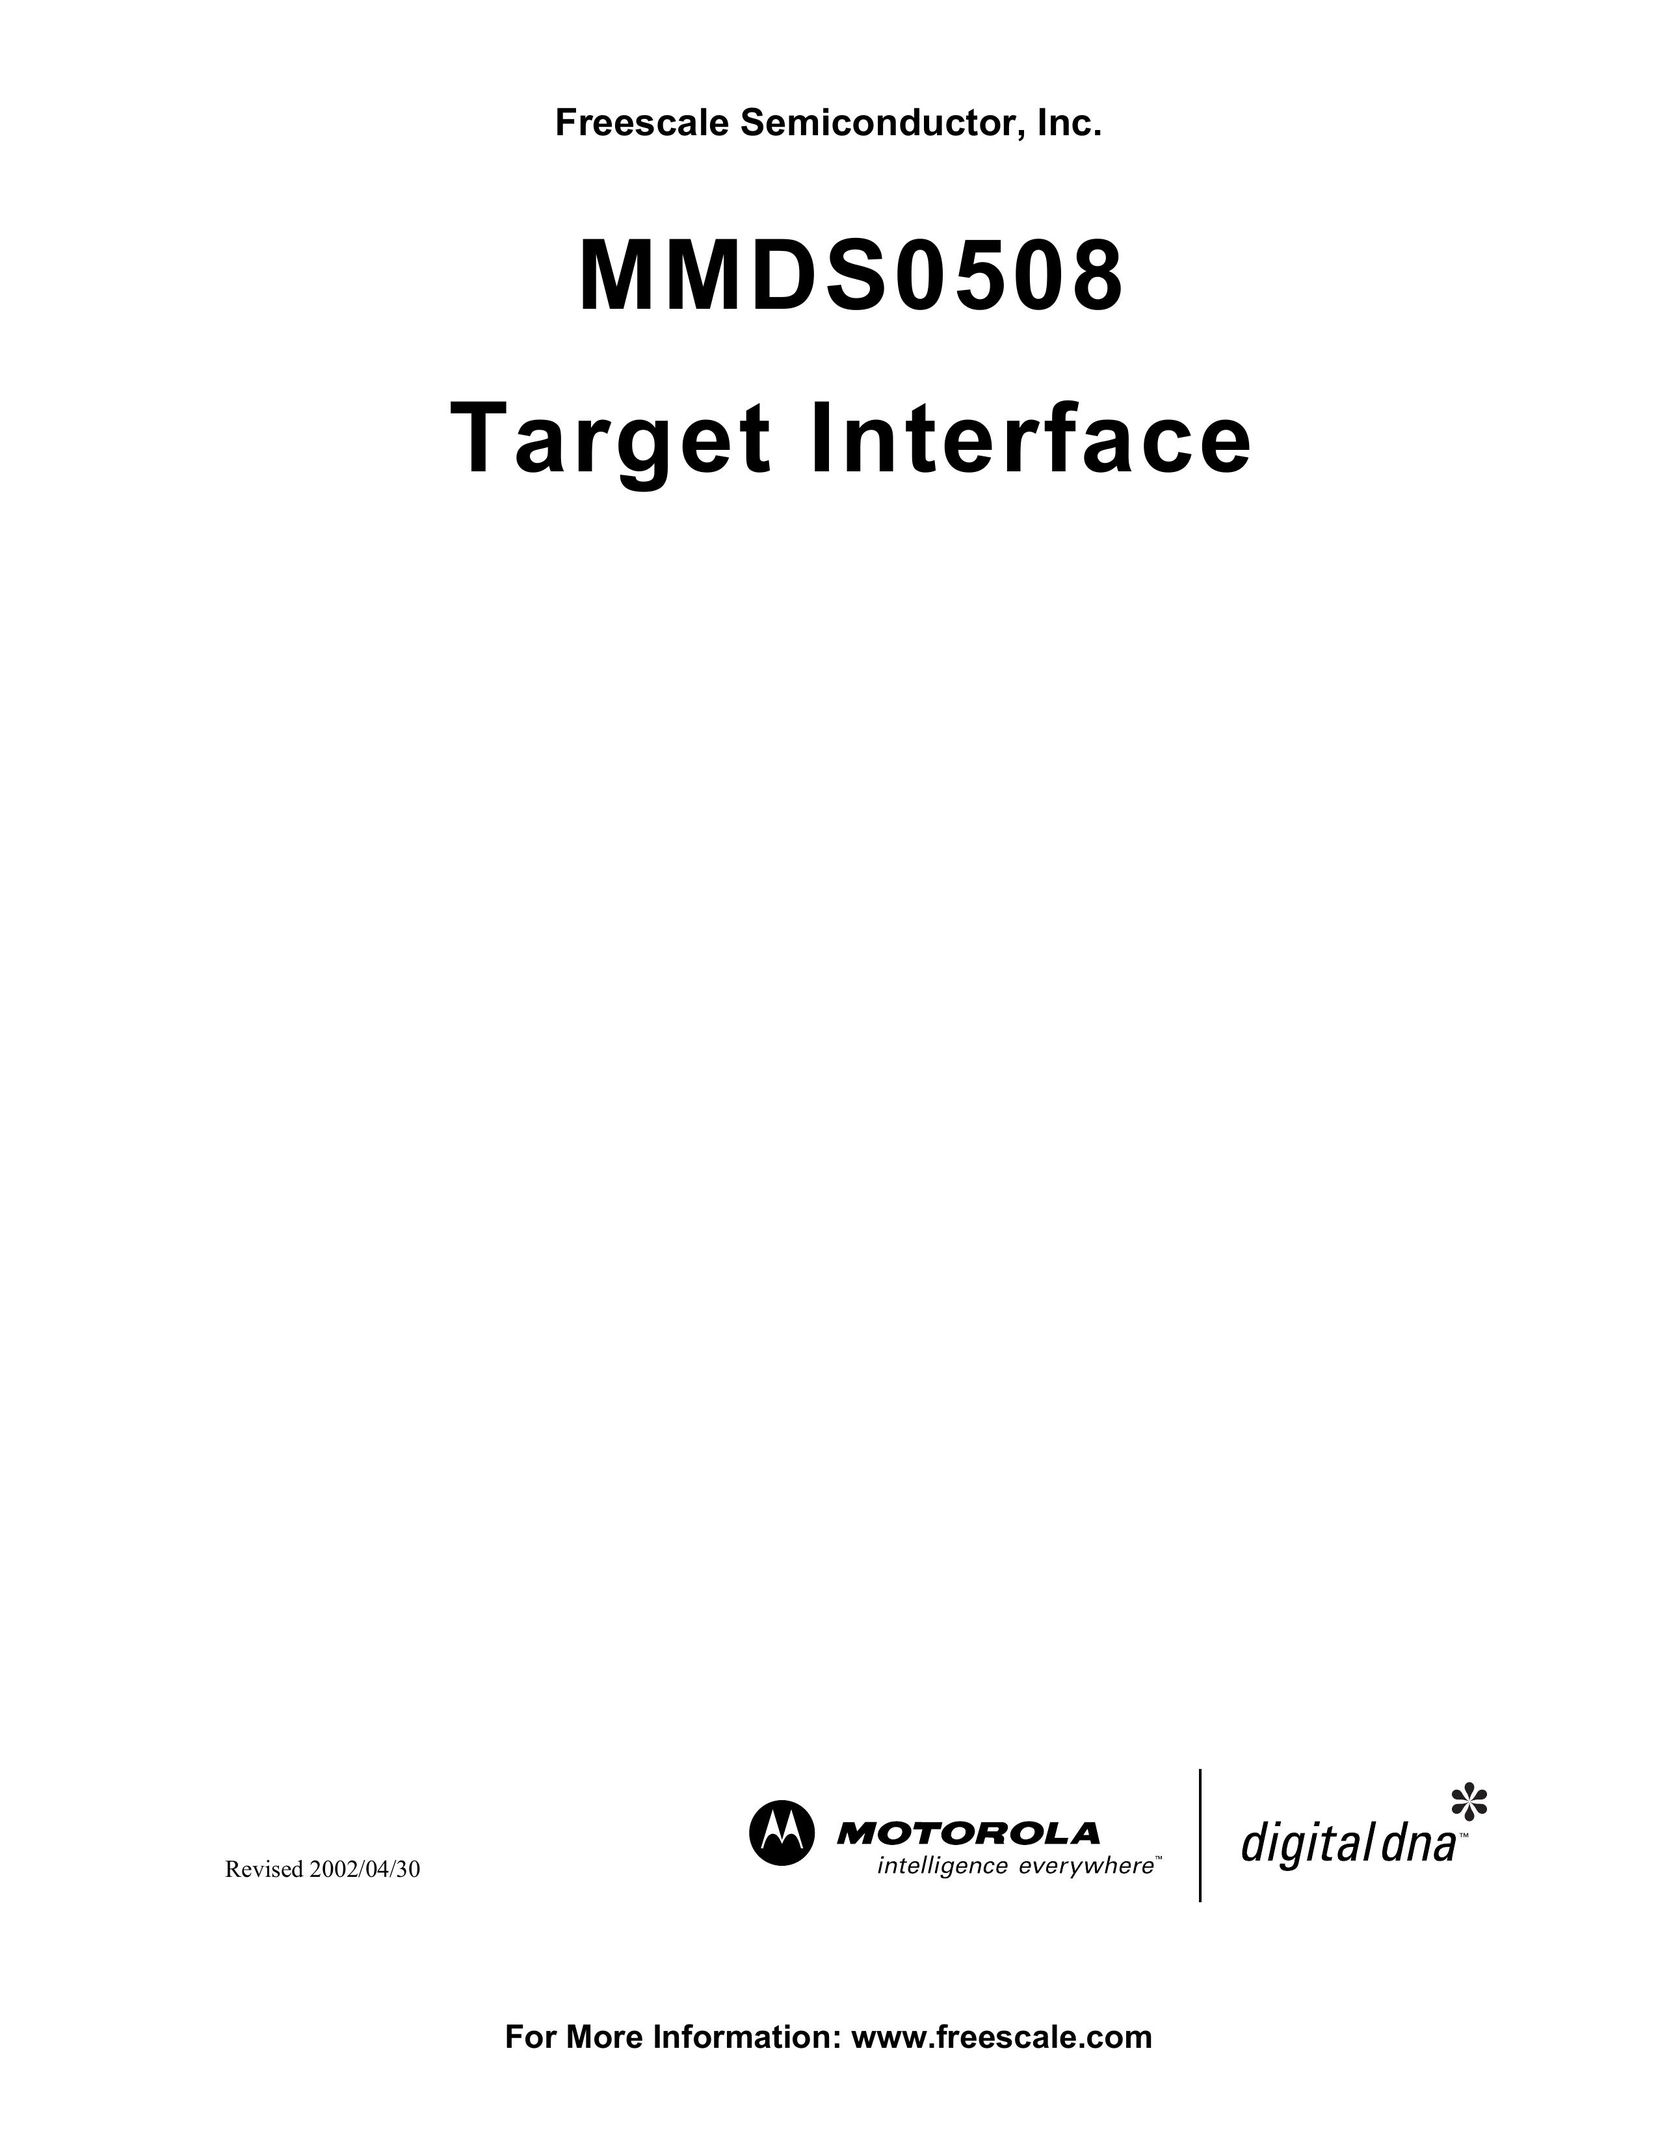 Freescale Semiconductor MMDS0508 Network Router User Manual